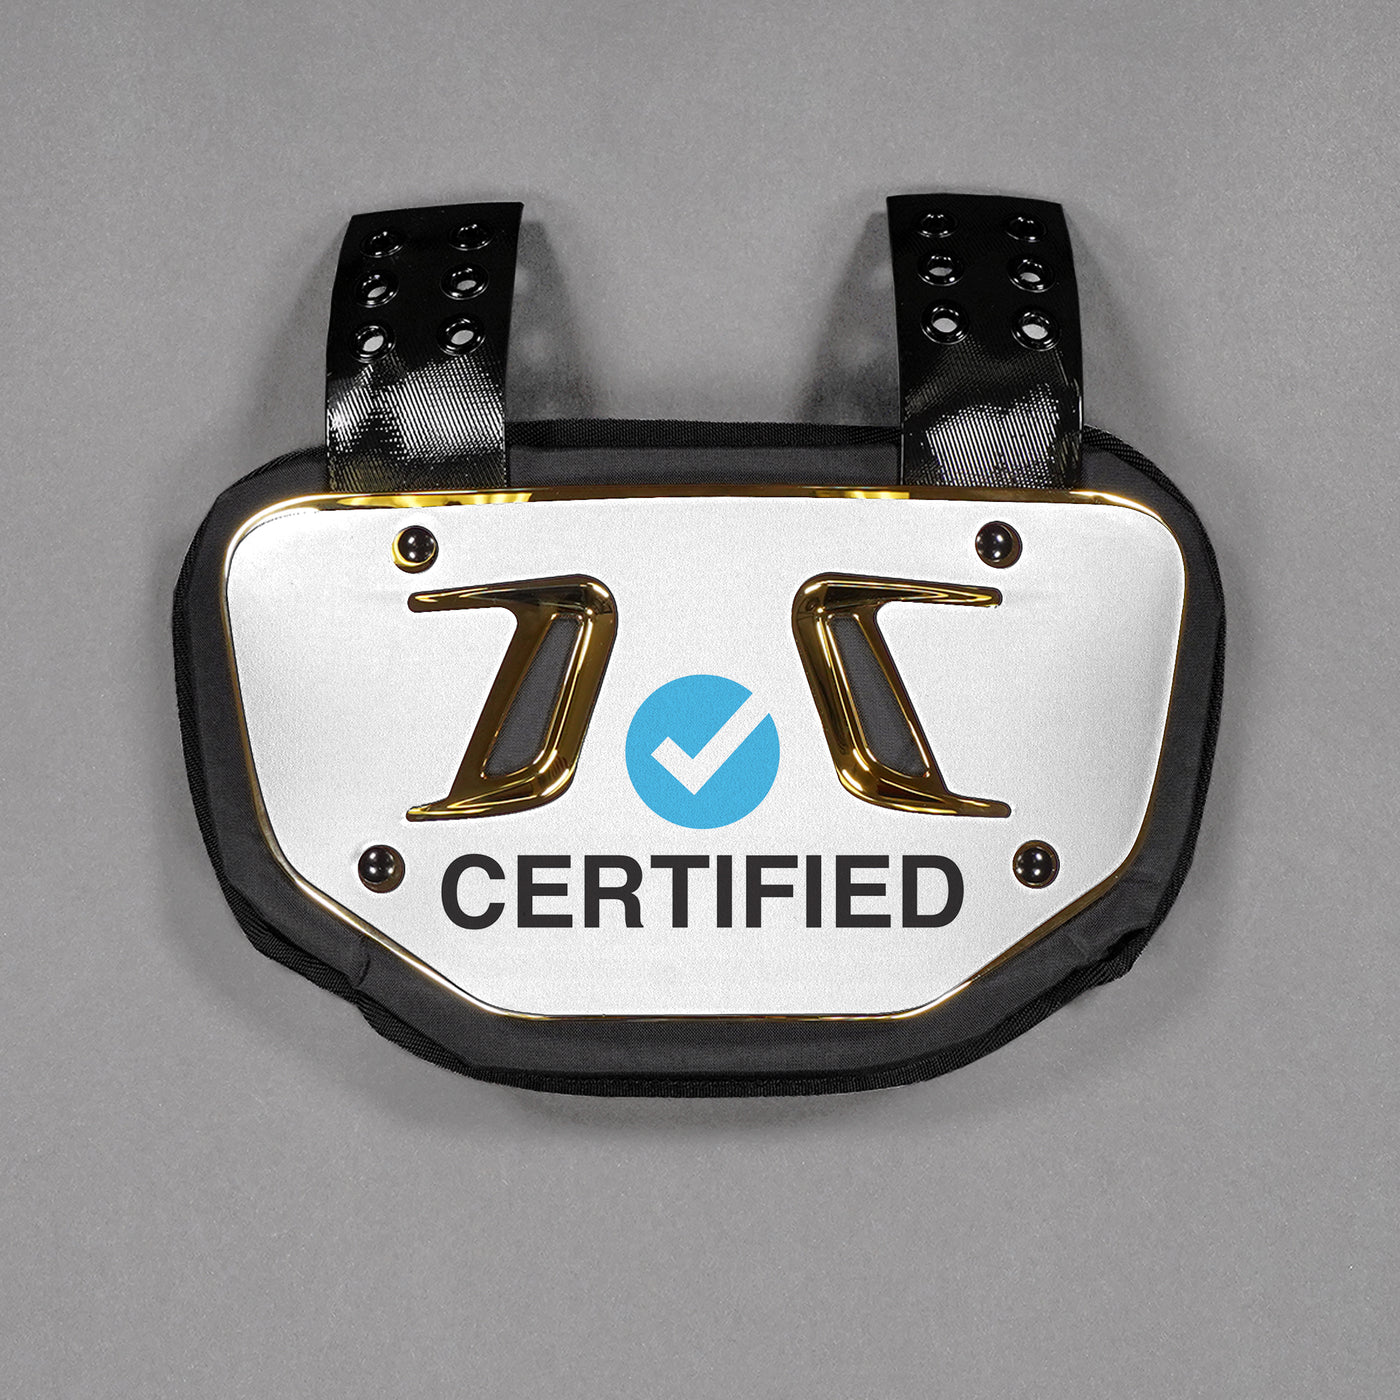 Certified Sticker for Back Plate